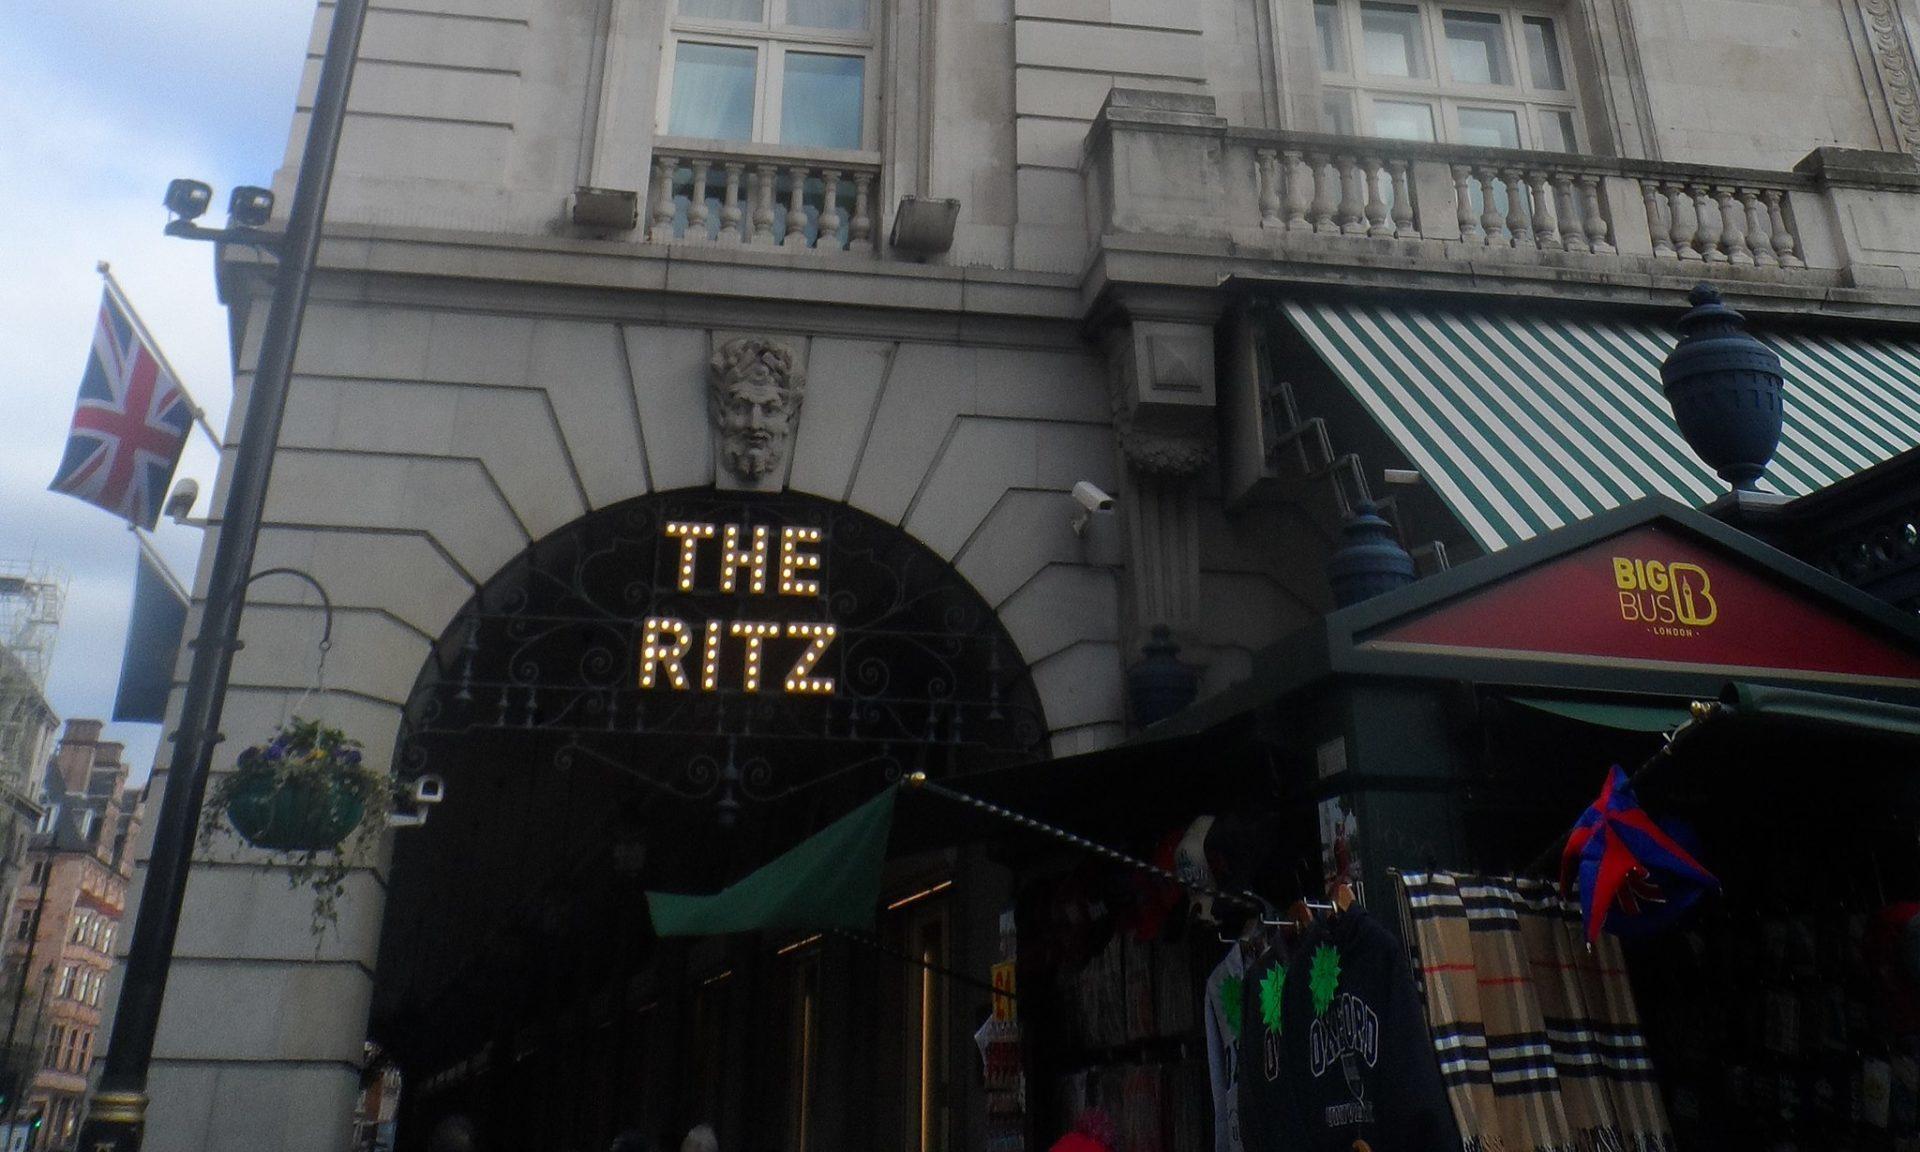 This past August, hackers scammed restaurant customers of The Ritz of London into sharing payment card information. (Sheila1988/CC BY-SA 4.0)